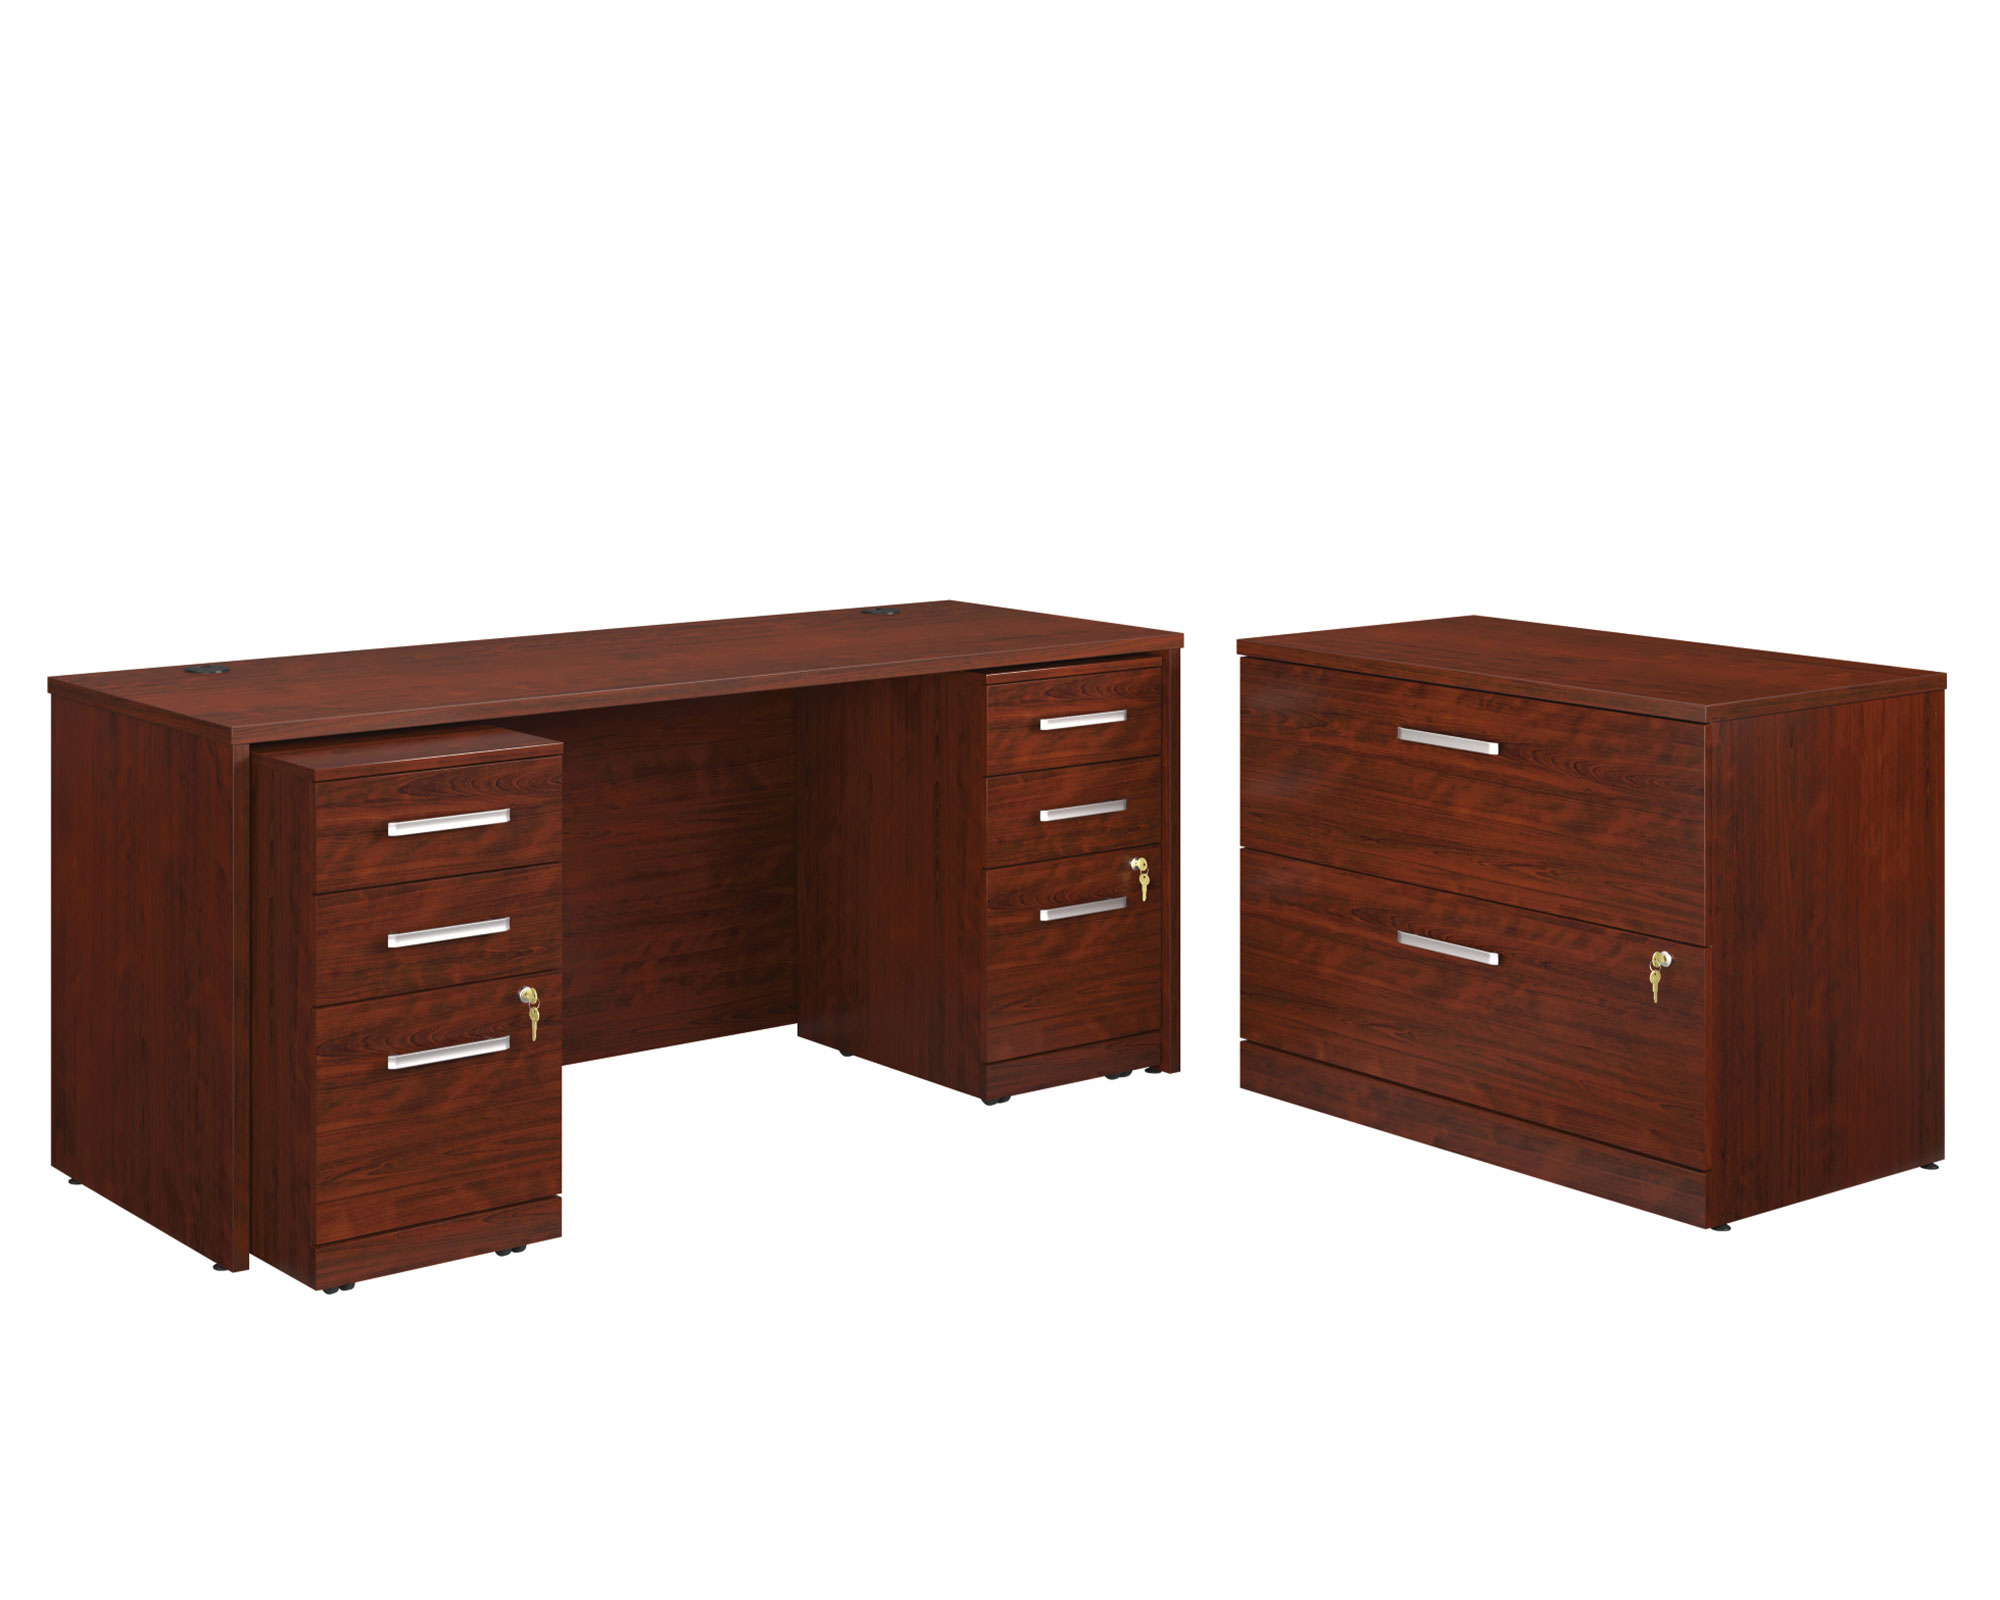 Sauder Affirm 72" x 24" Desk Shell/Lateral File/Two 3-Drawer Mobile Files Cherry - image 1 of 8